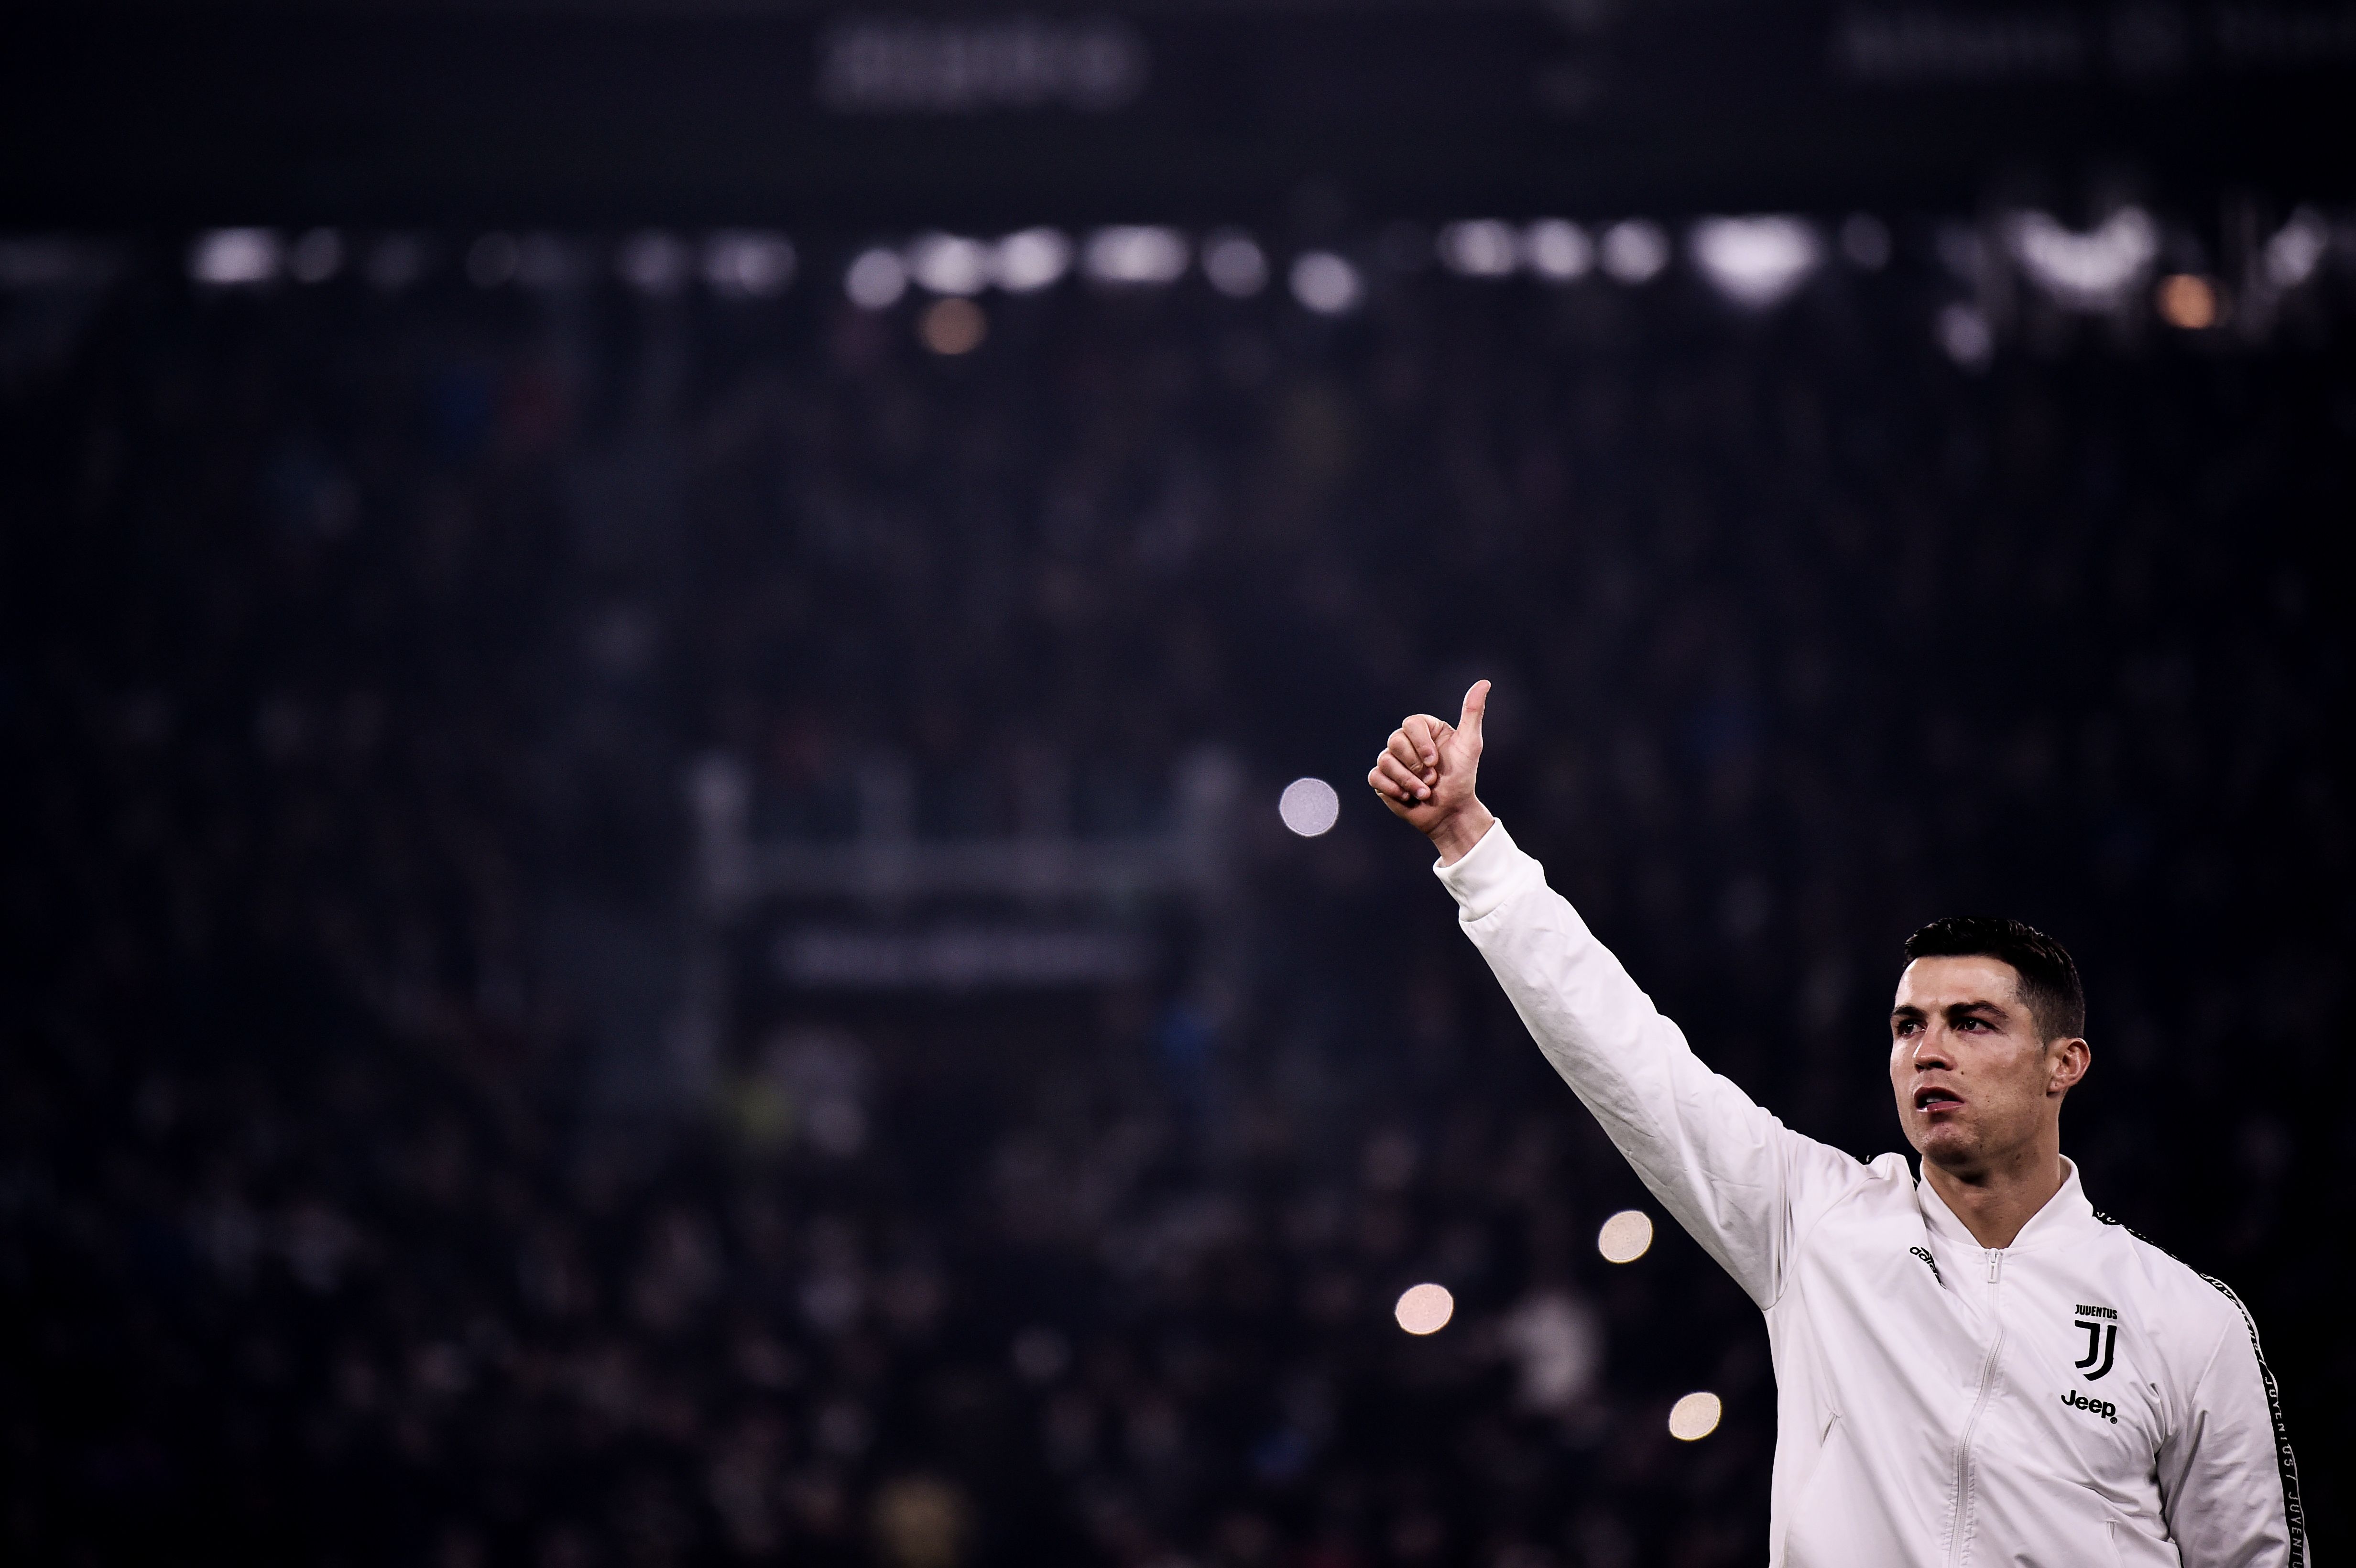 Juventus' Portuguese forward Cristiano Ronaldo thumbs up to supporters prior to the start of the Serie A football match between Juventus and InterMilan at the Stadio delle Alpi on December 7, 2018. (Photo by Marco BERTORELLO / AFP)        (Photo credit should read MARCO BERTORELLO/AFP/Getty Images)